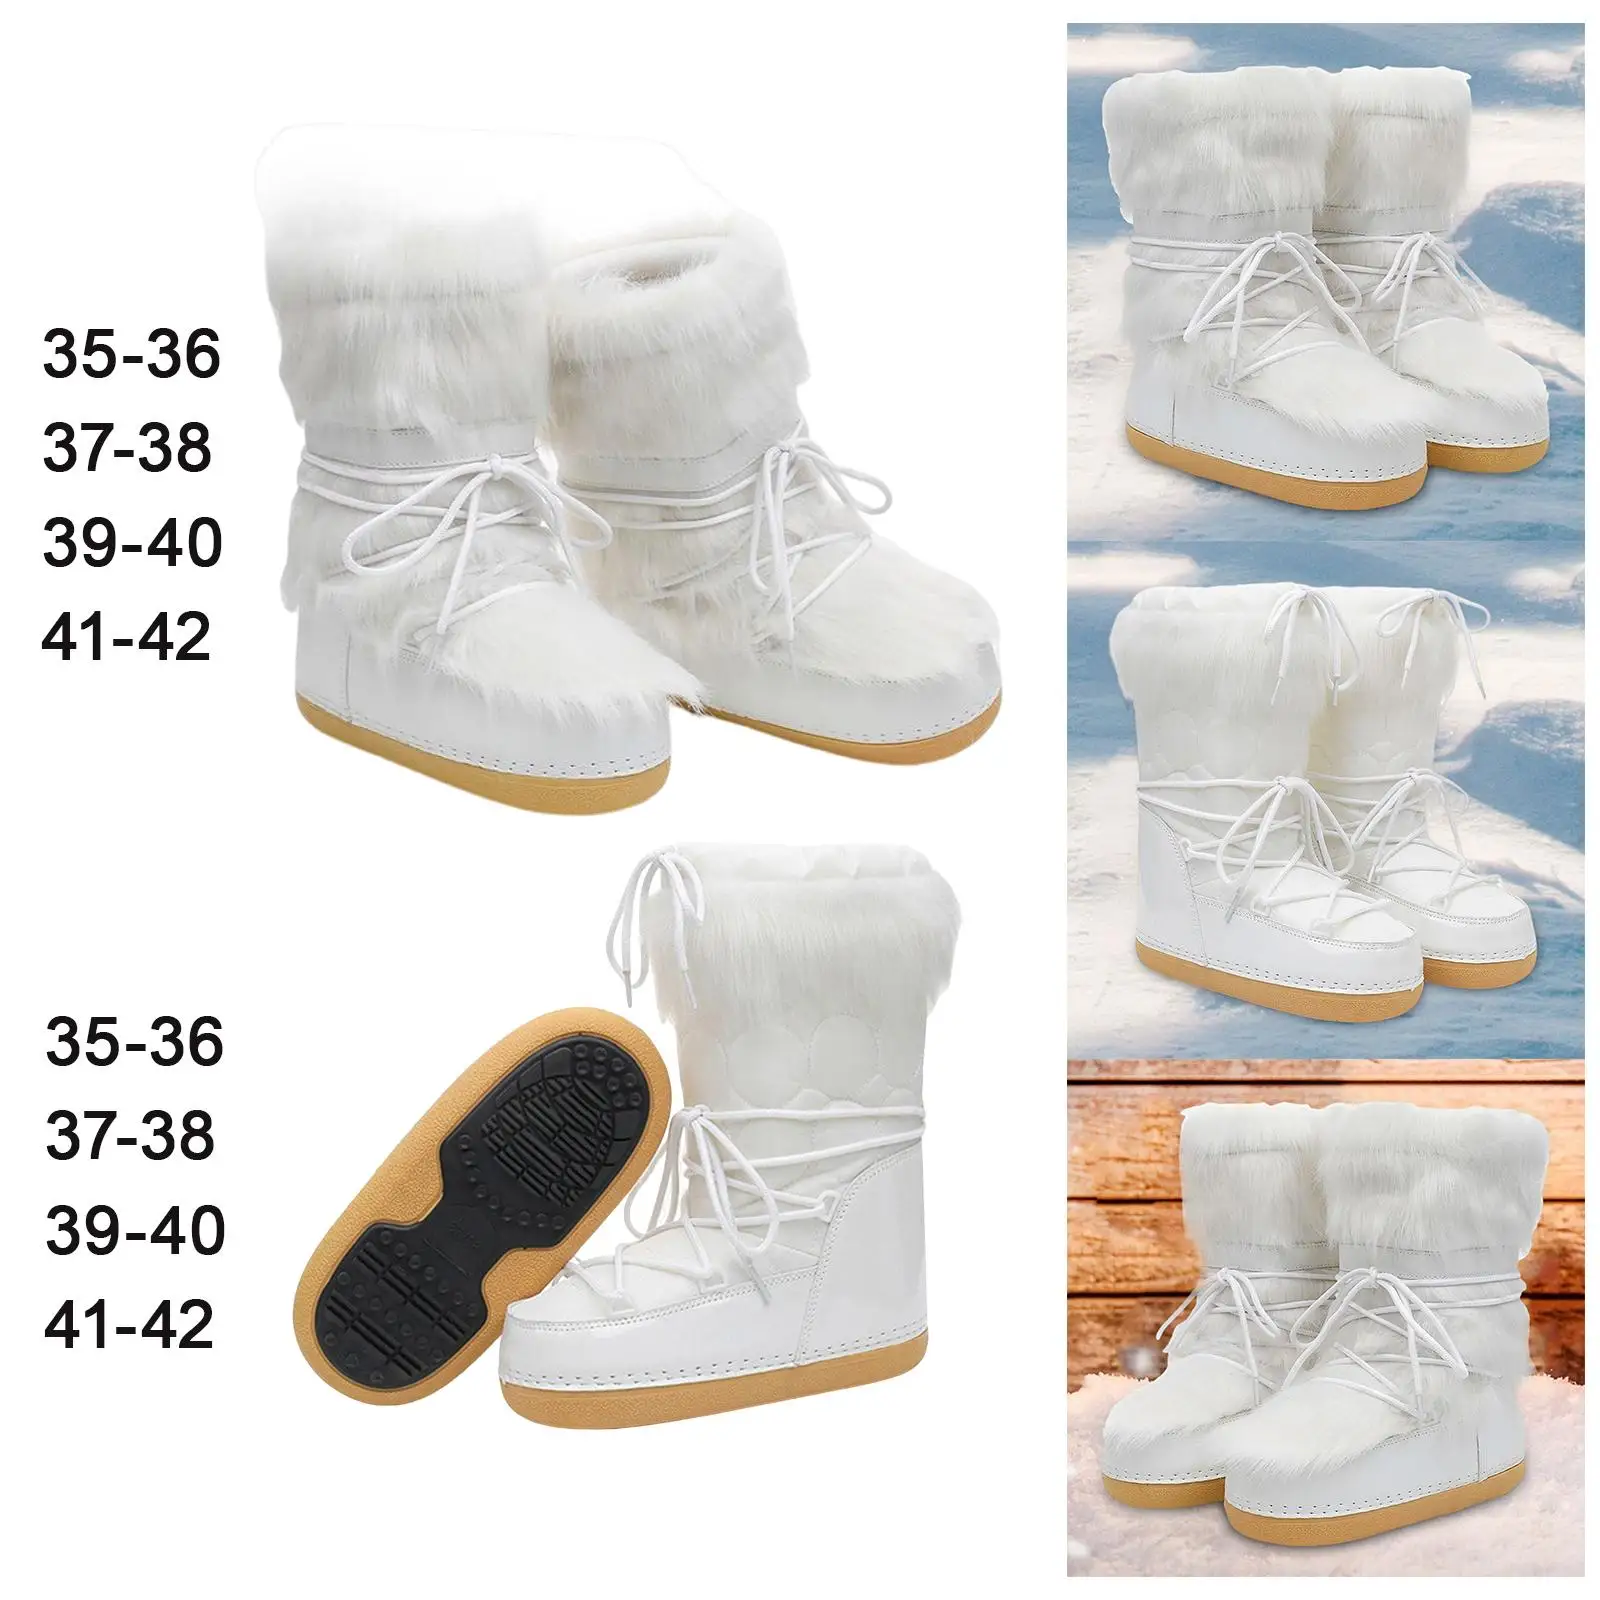 Women`s Snow Boots White Ski Boots Mid Calf Booties Lace up Water Resistant Long Boots Comfortable for Outdoor Trail Work Ladies